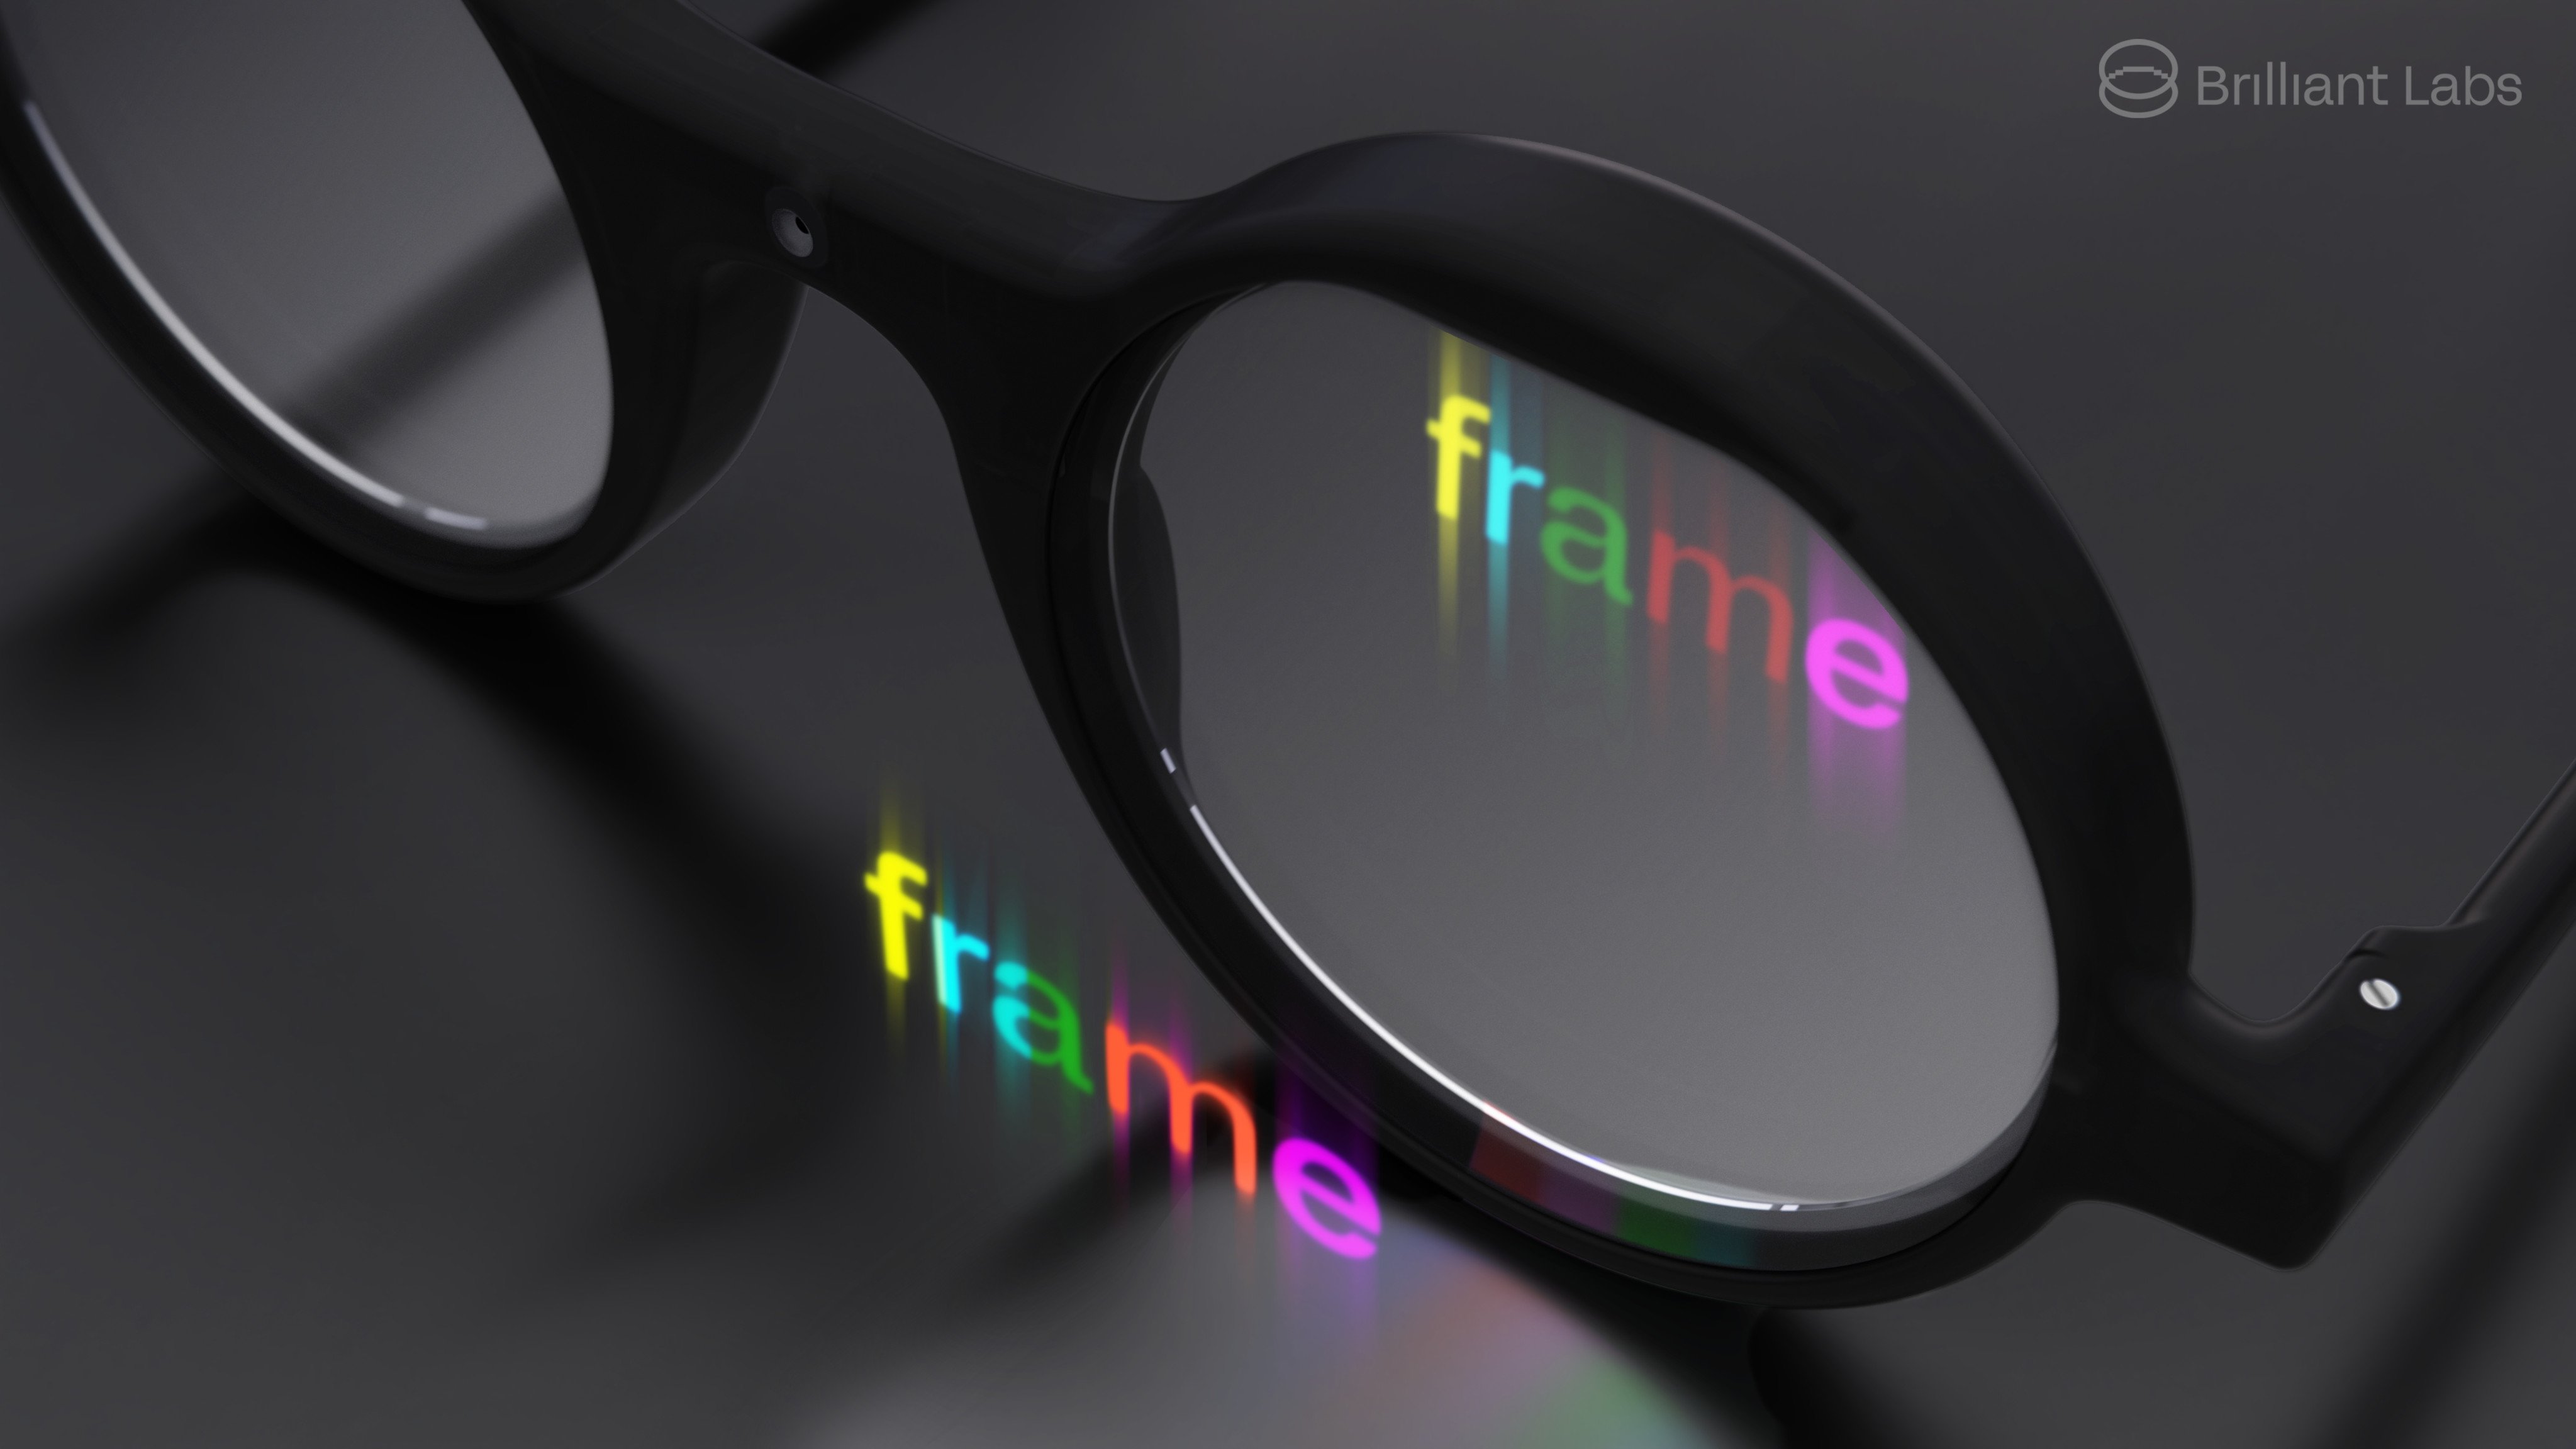 Brilliant Labs has announced its first pair of smart glasses, called Frame, which relies on generative artificial intelligence as its main selling point. Photo: Brilliant Labs